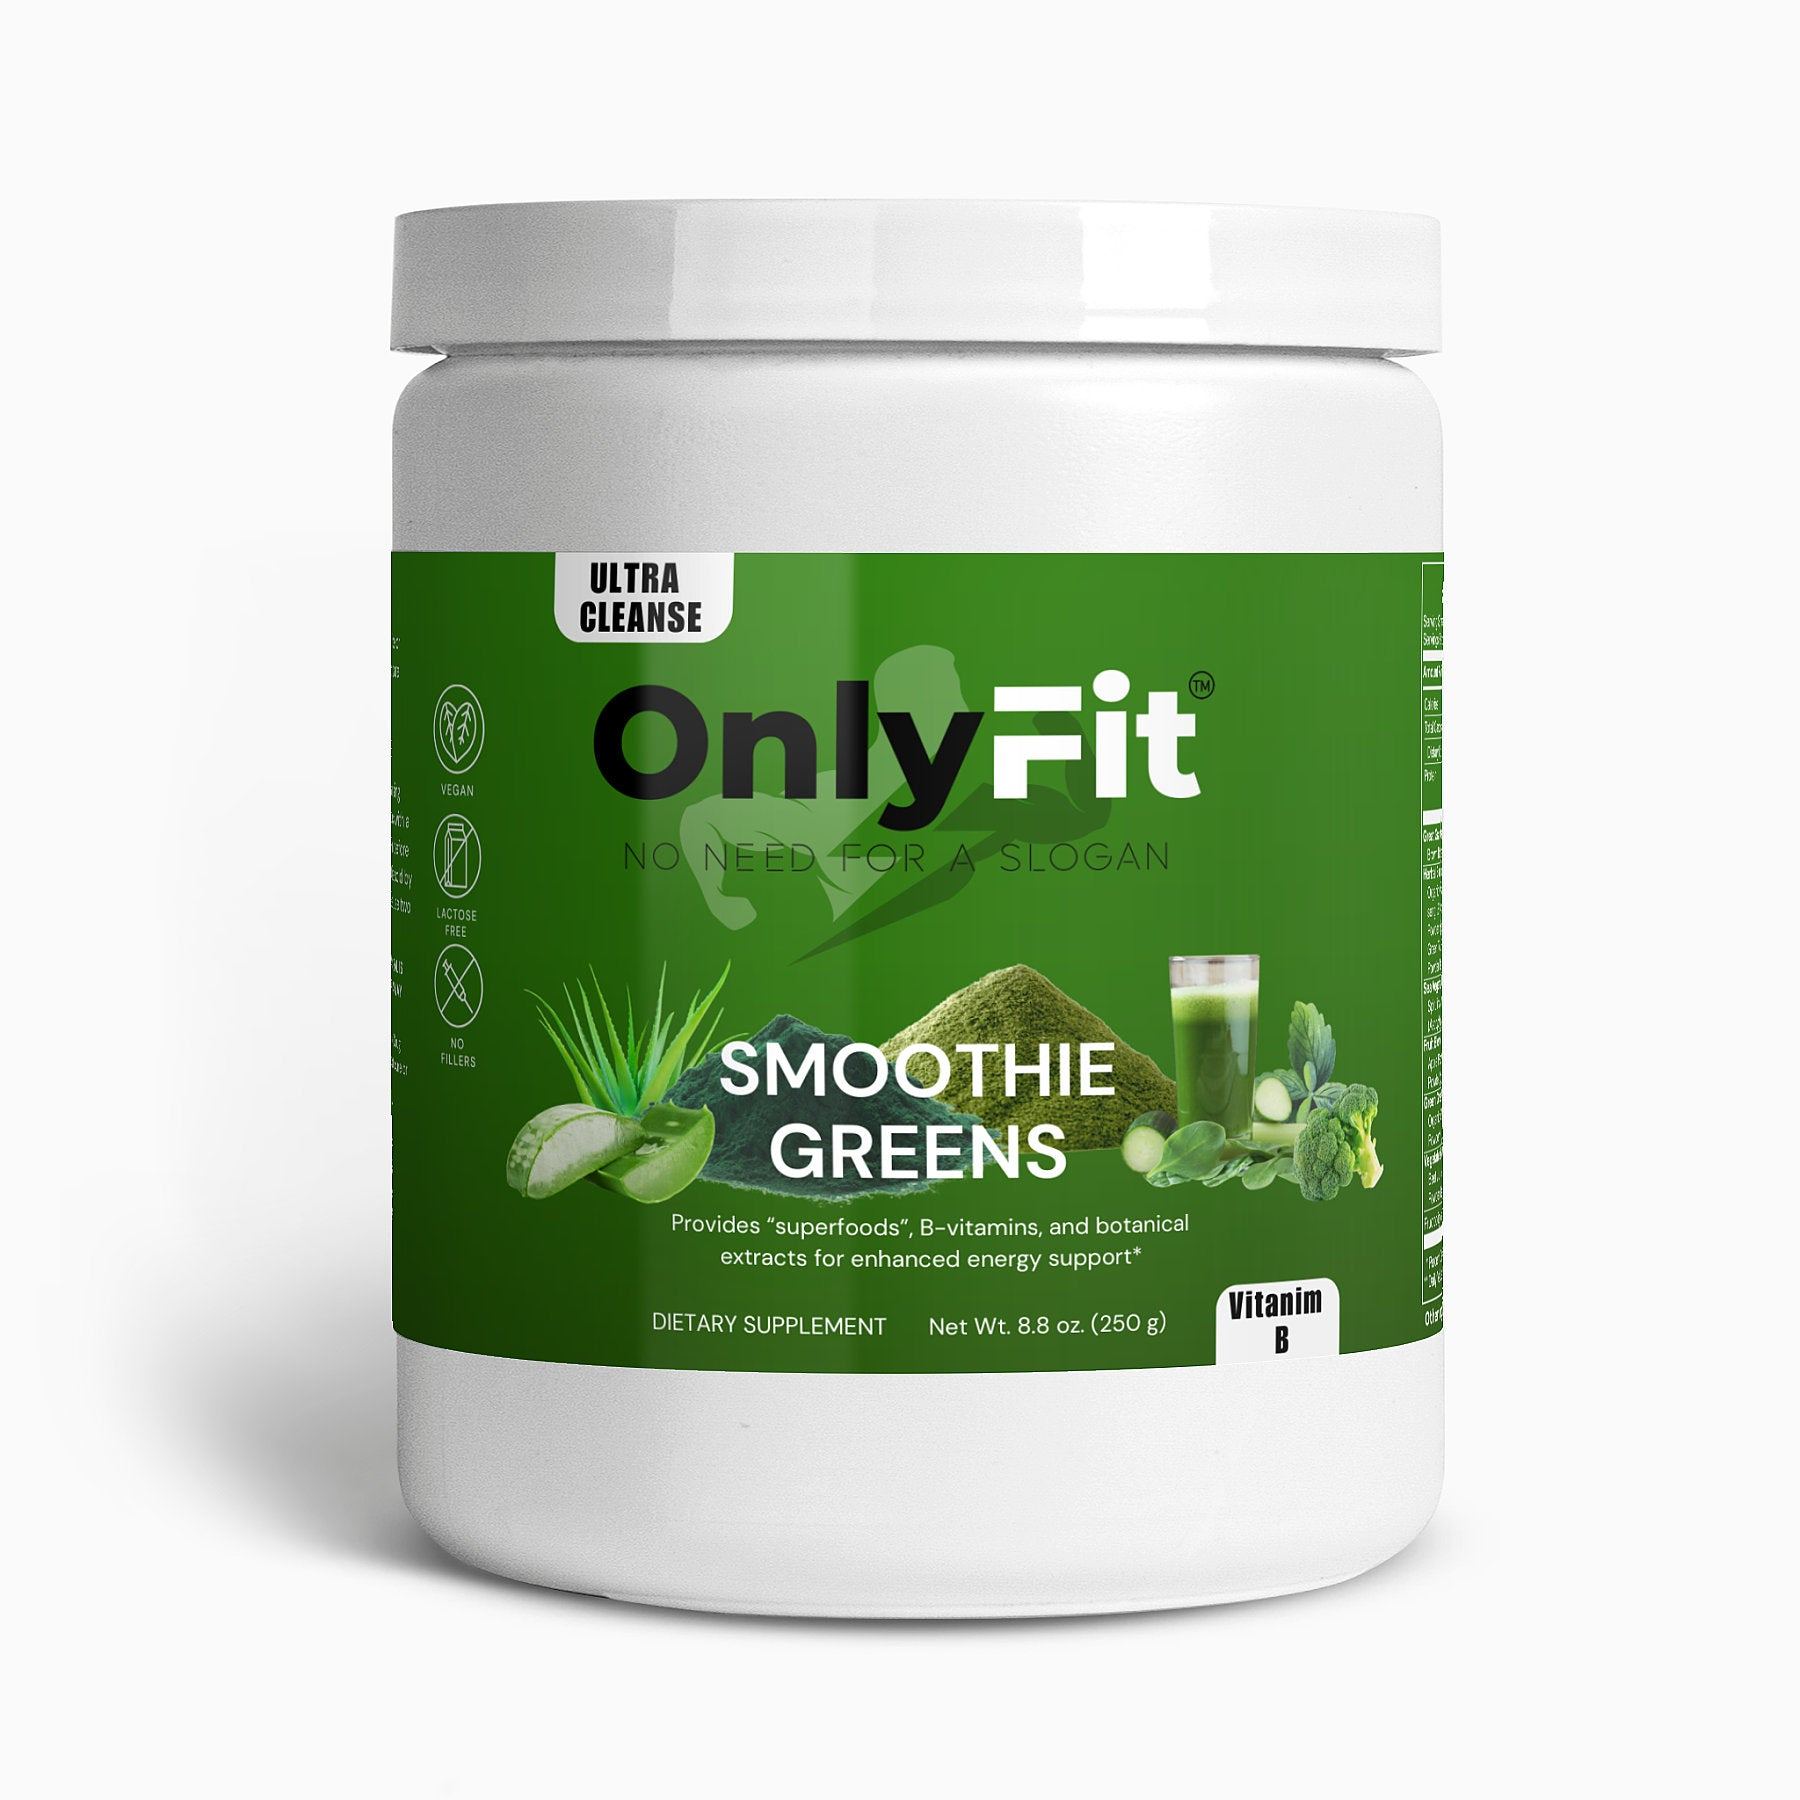 "GREENISH" Ultra Cleanse Smoothie Greens - OnlyFit